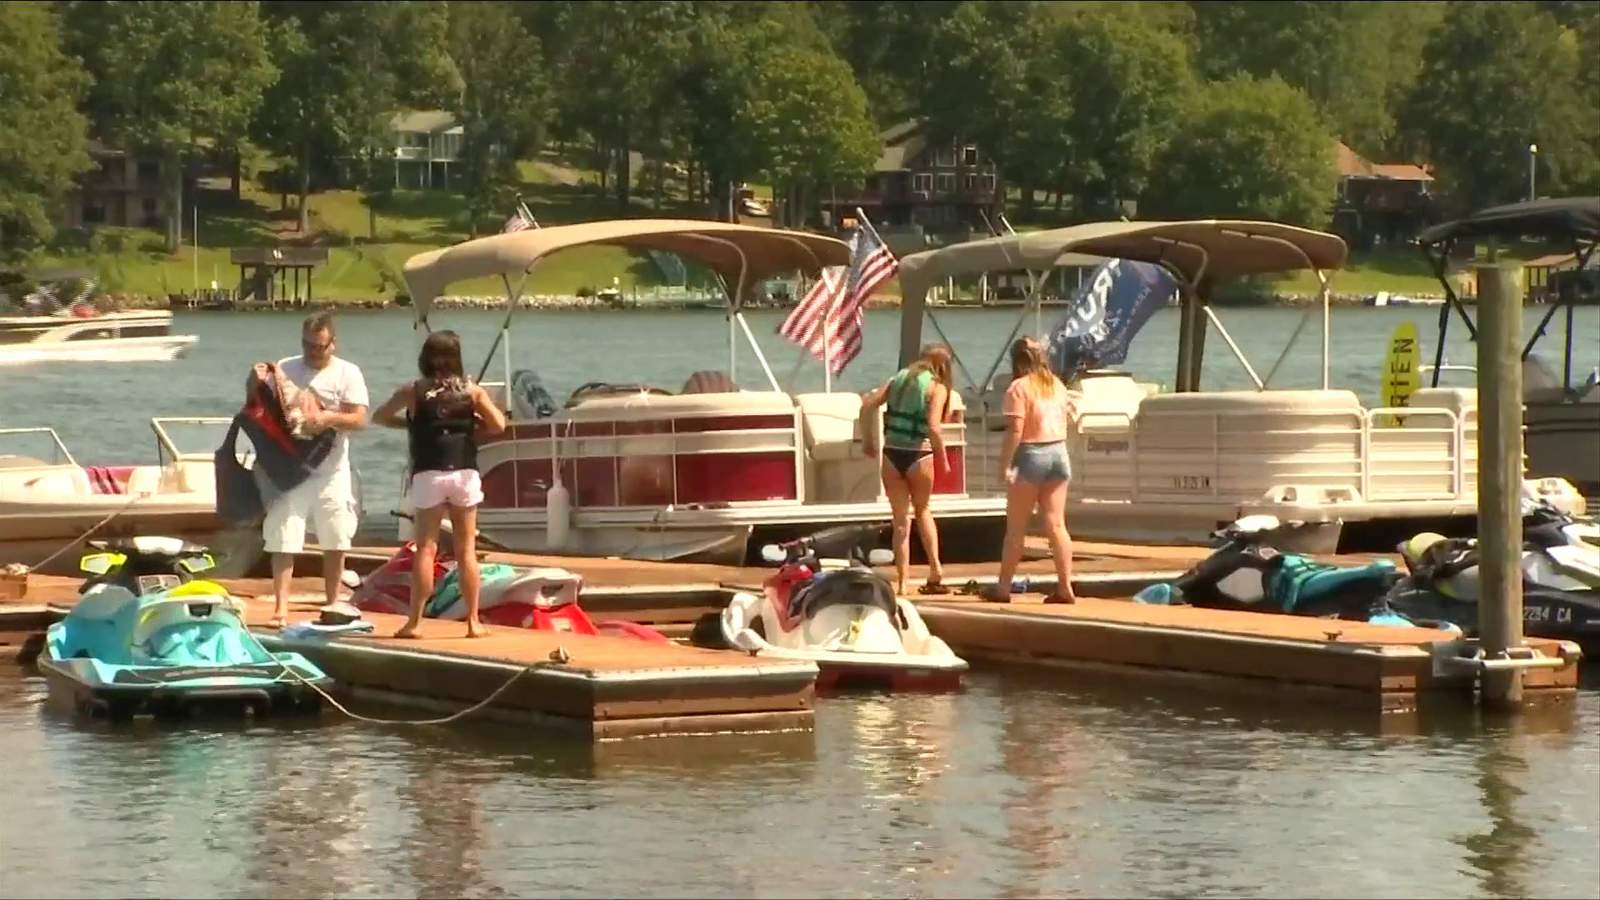 ‘It was insane’: Unprecedented times lead to business boom at Smith Mountain Lake